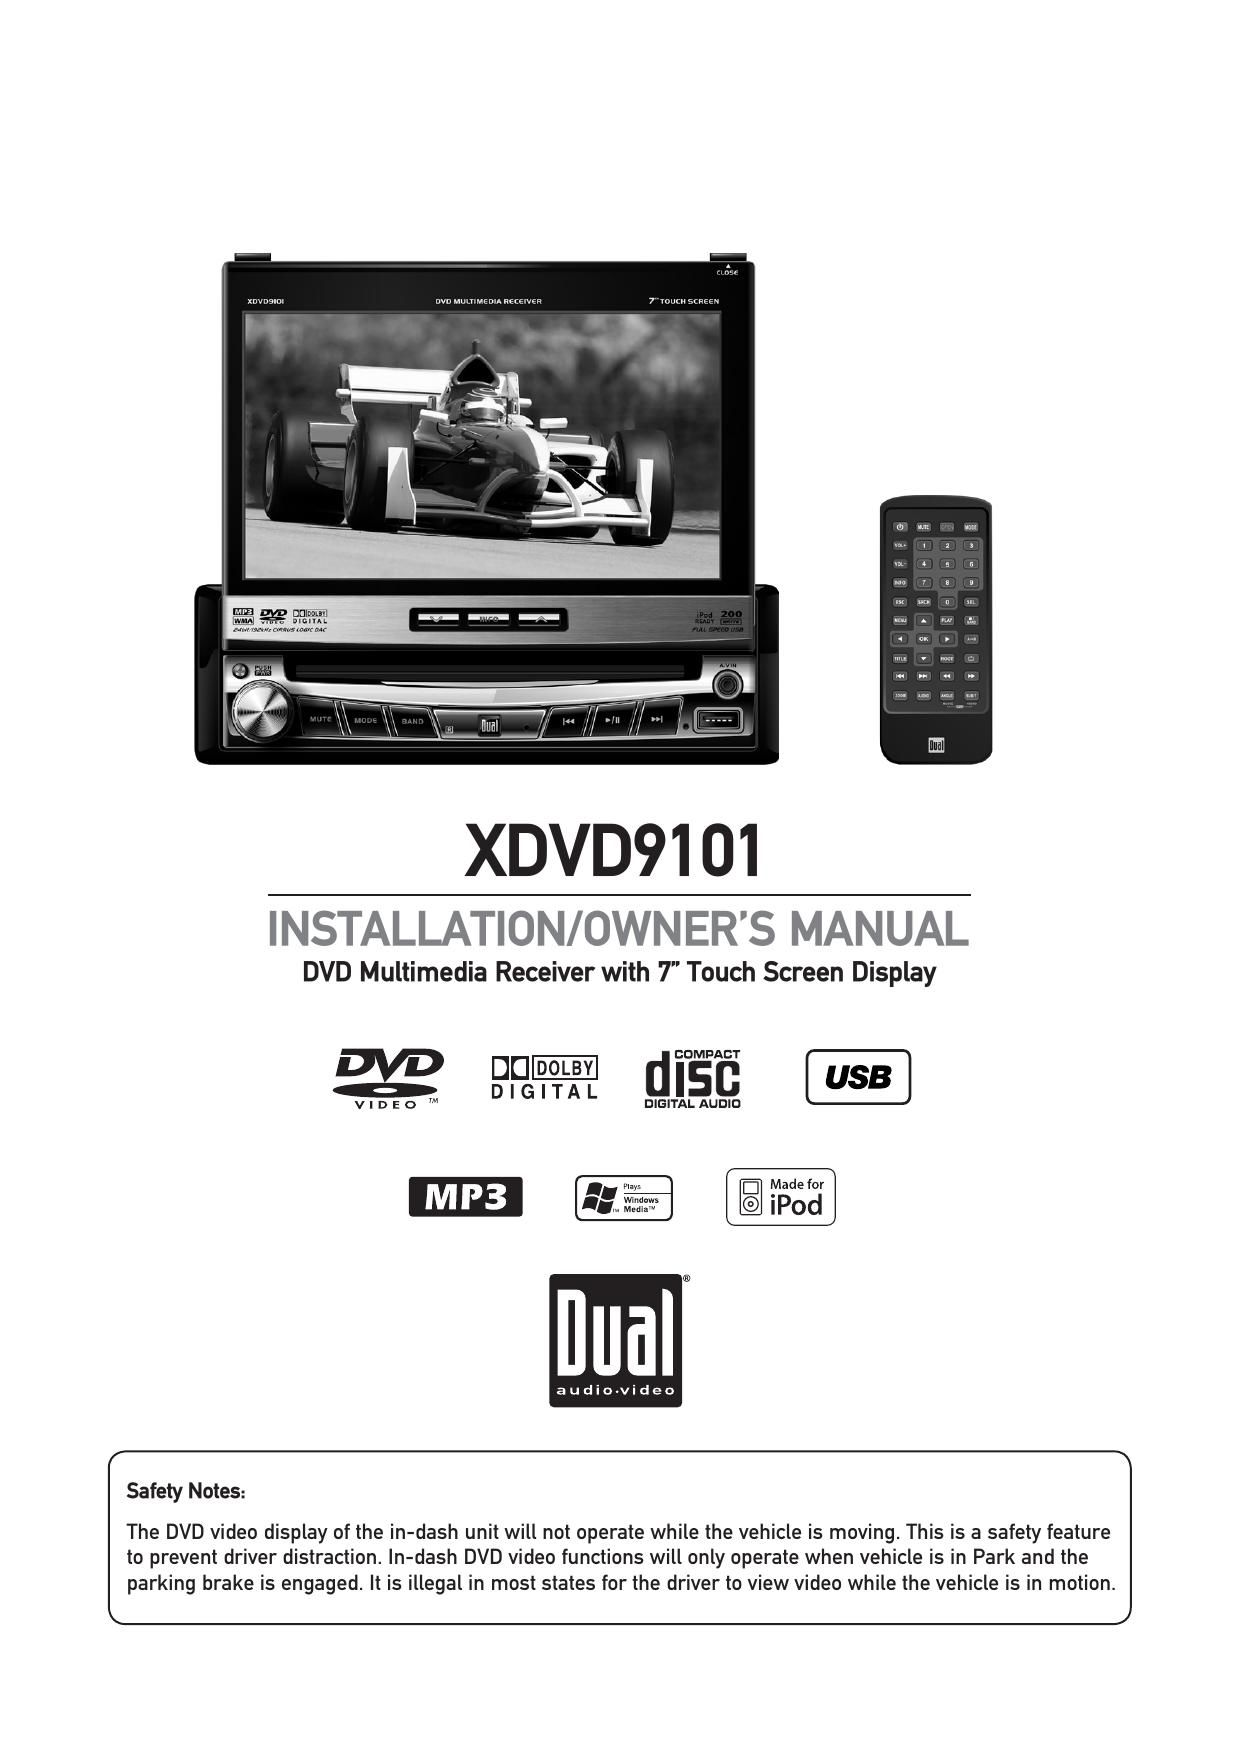 Dual XDVD 9101 Owners Manual